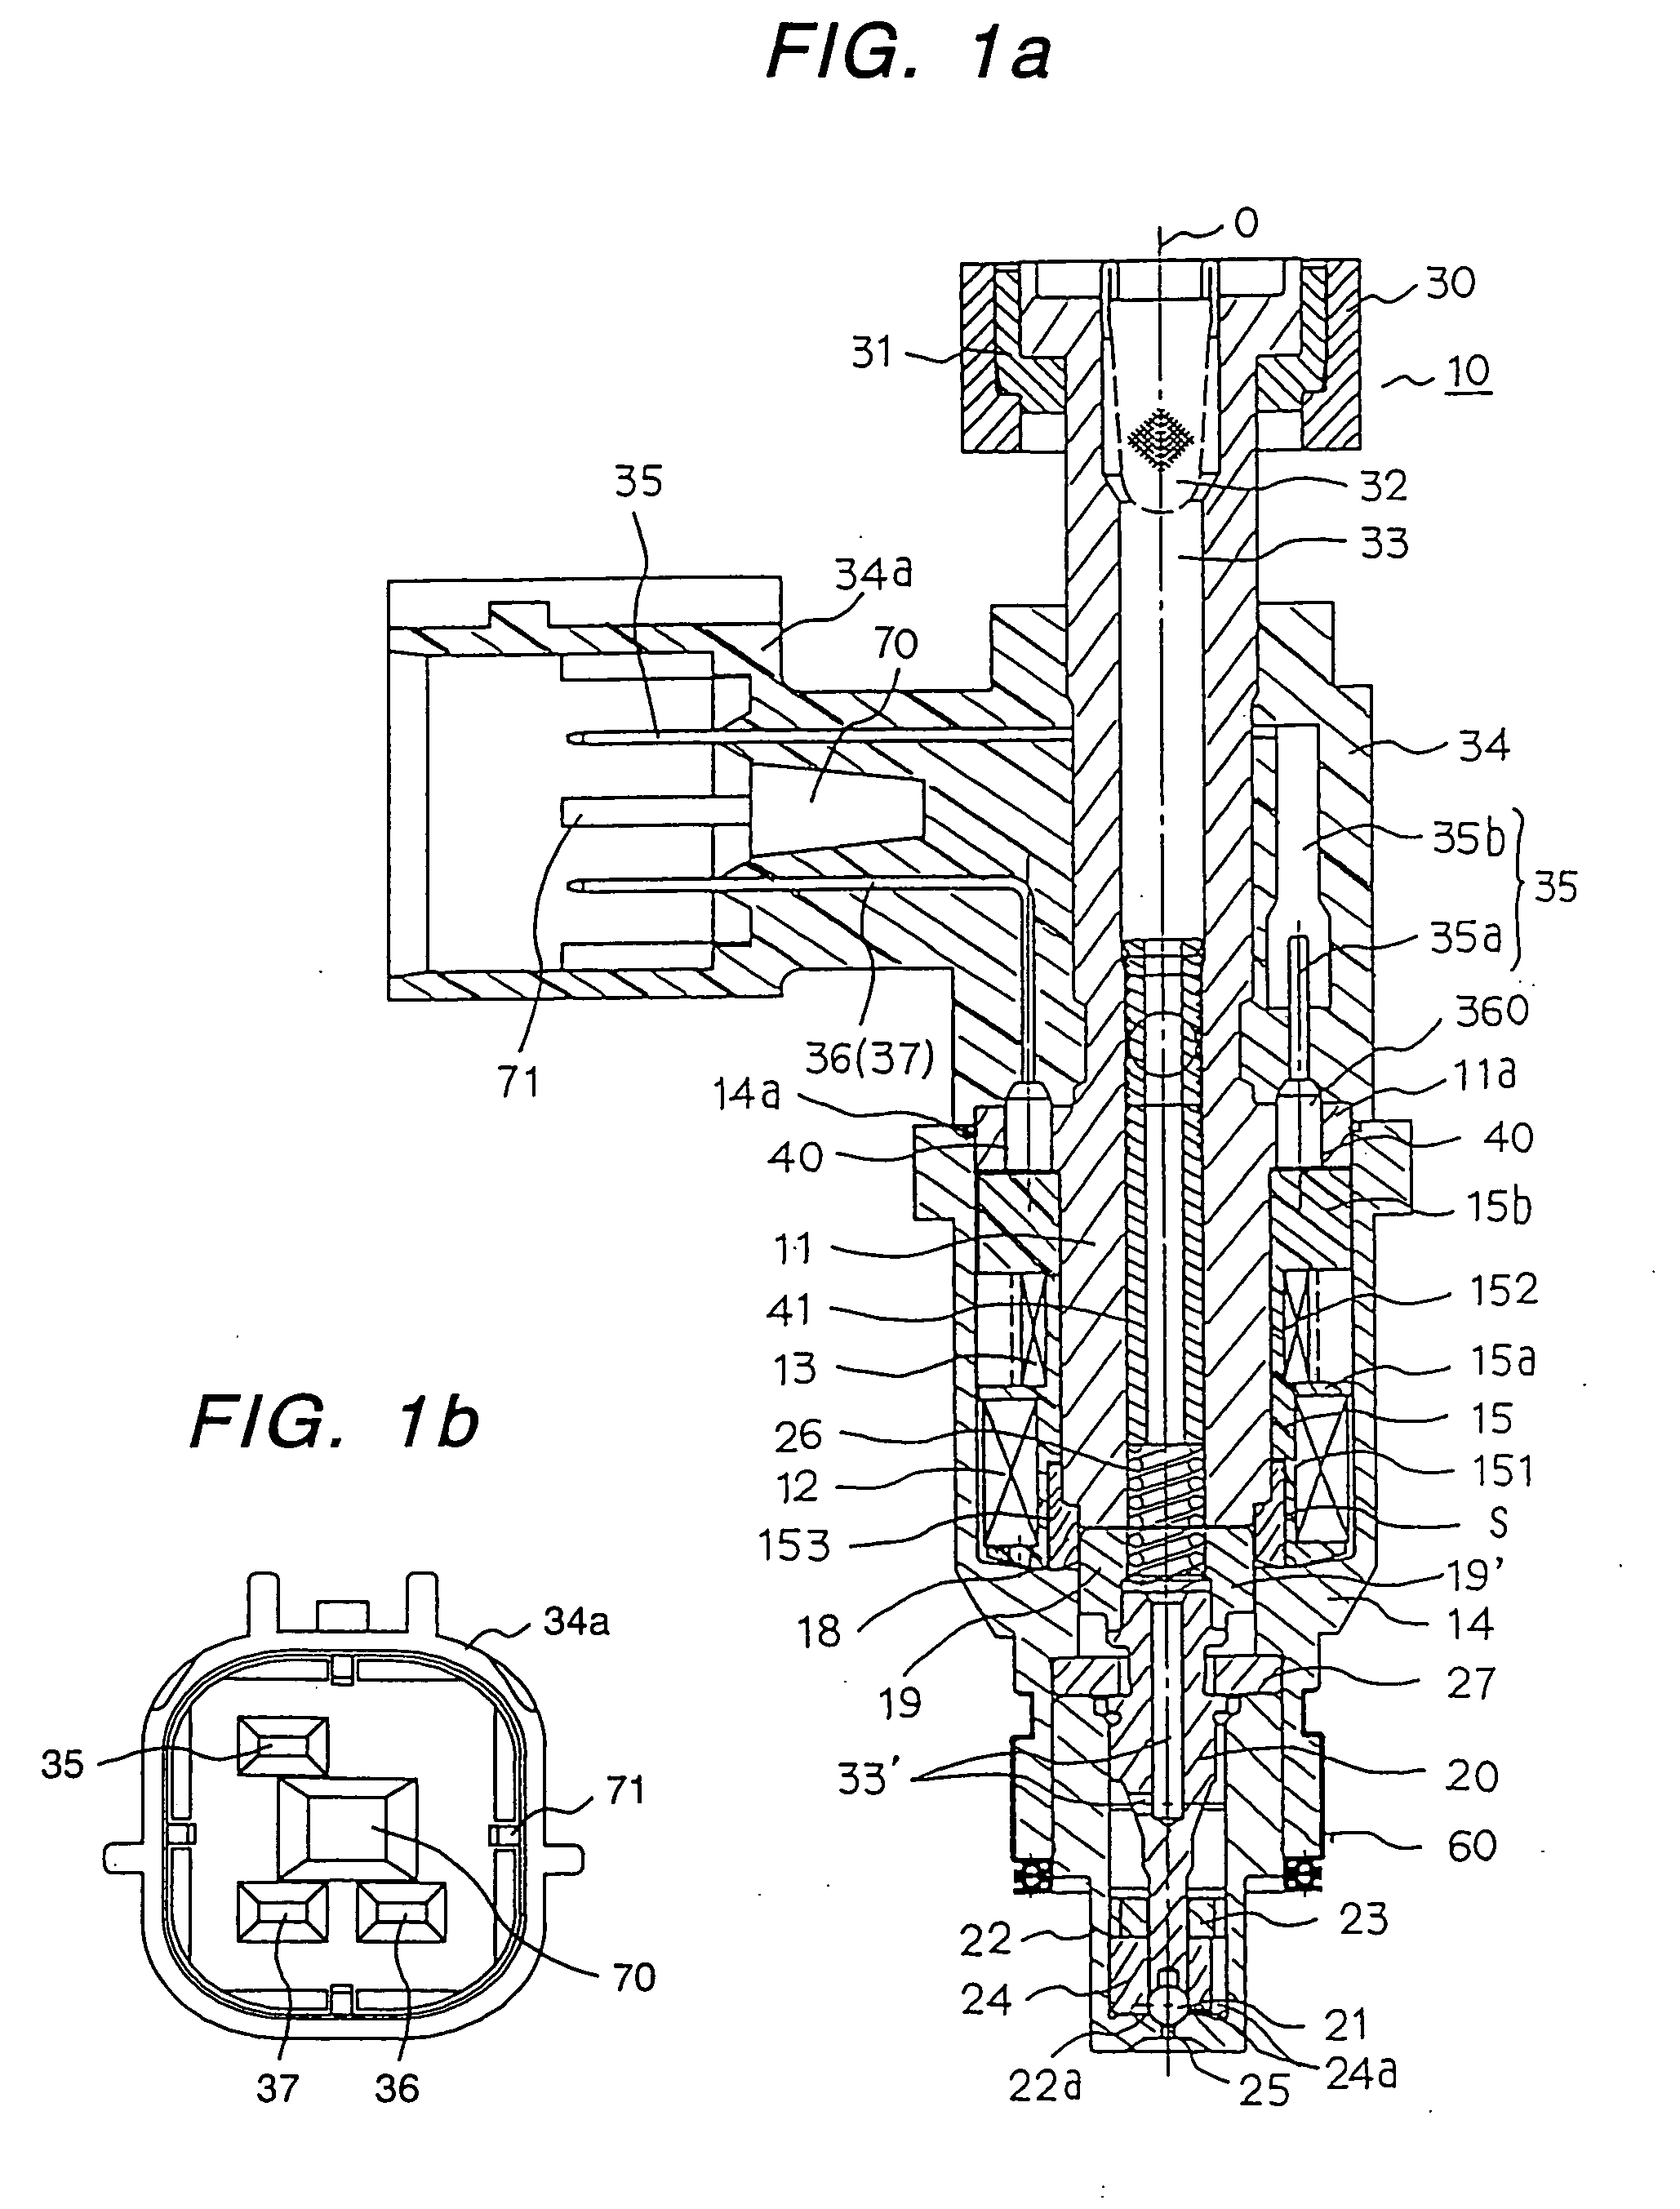 Electromagnetic fuel injector